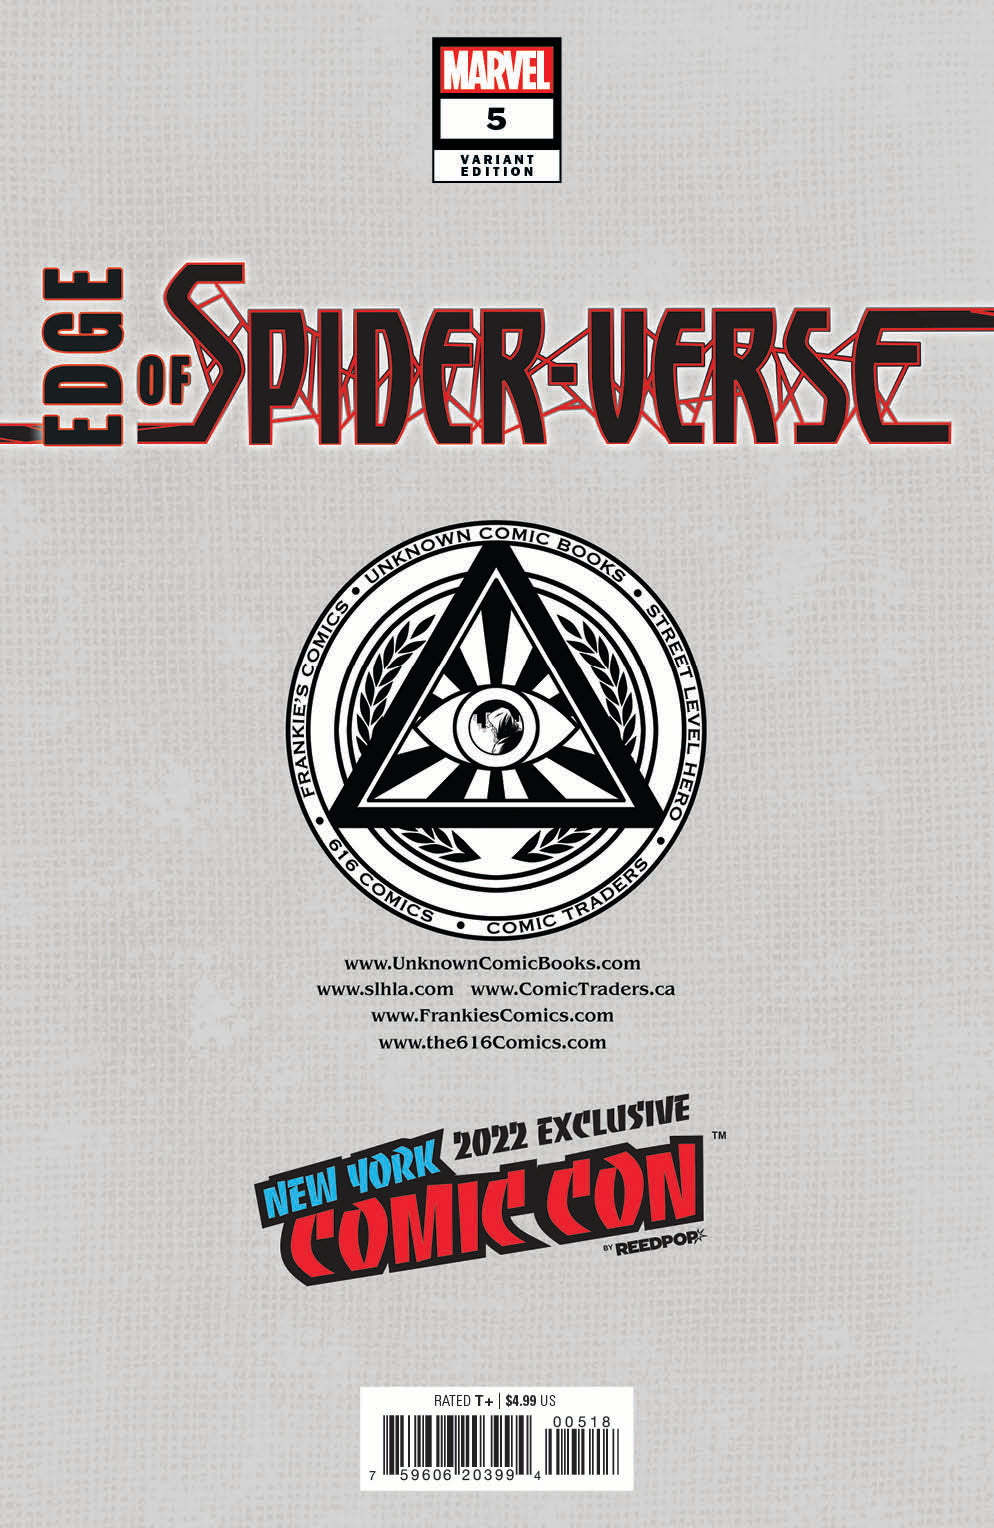 [5 PACK] EDGE OF SPIDER-VERSE (#1-#5) 1, 2, 3, 4, 5 UNKNOWN COMICS TYLER KIRKHAM EXCLUSIVE C2E2/NYCC BUNDLE (10/19/2022)